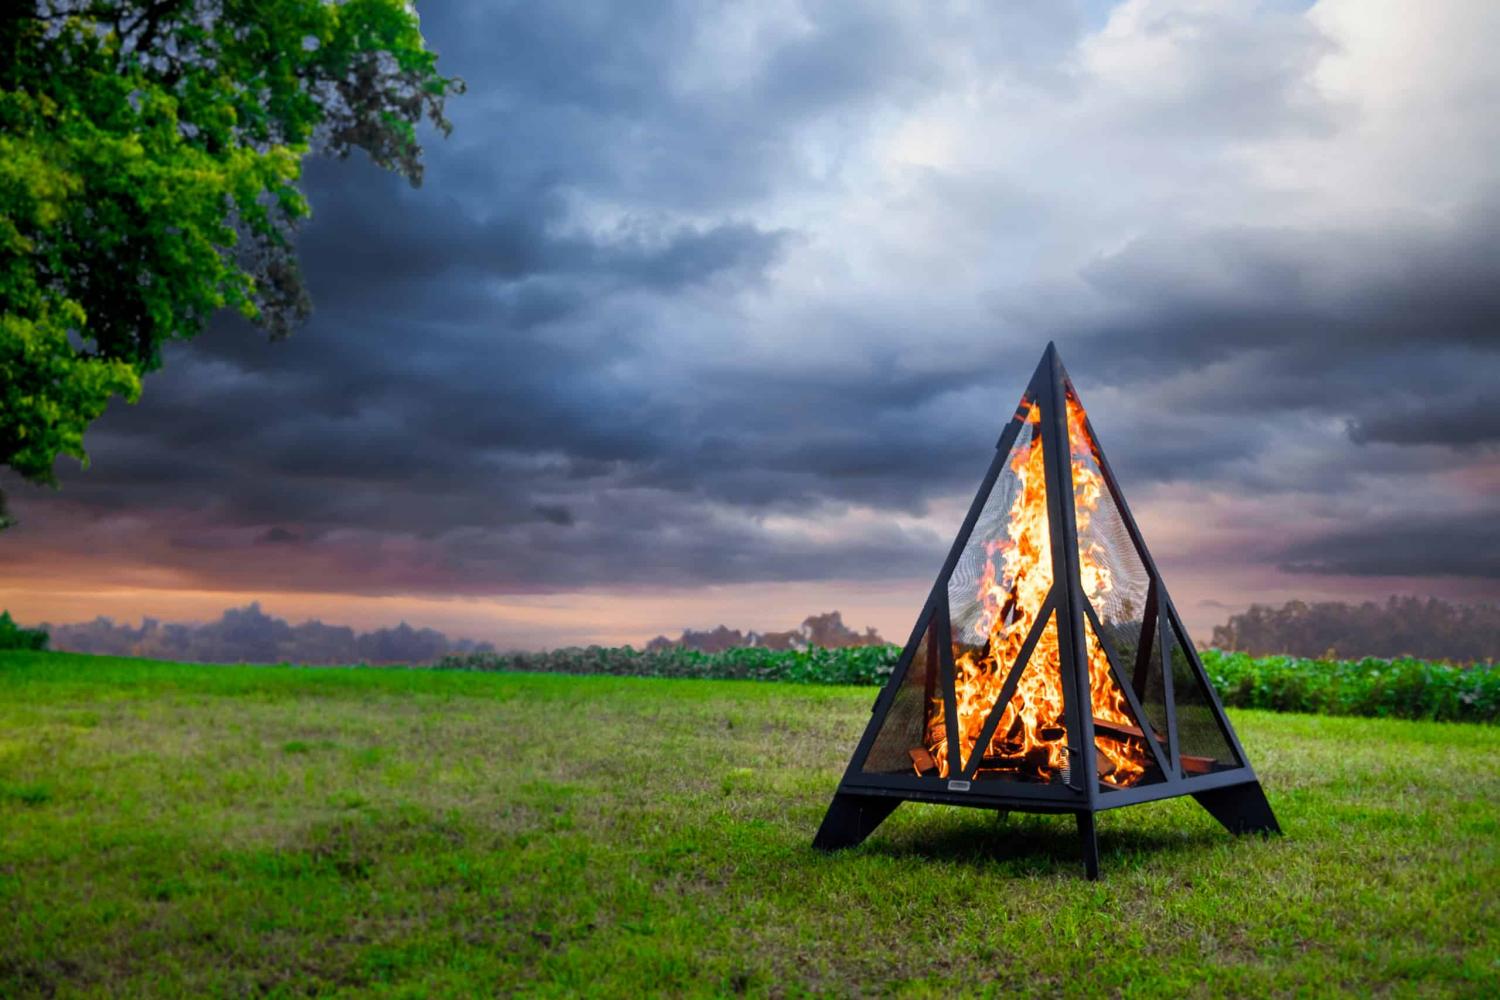 Pyramid Bonfire Pit outdoor fireplace